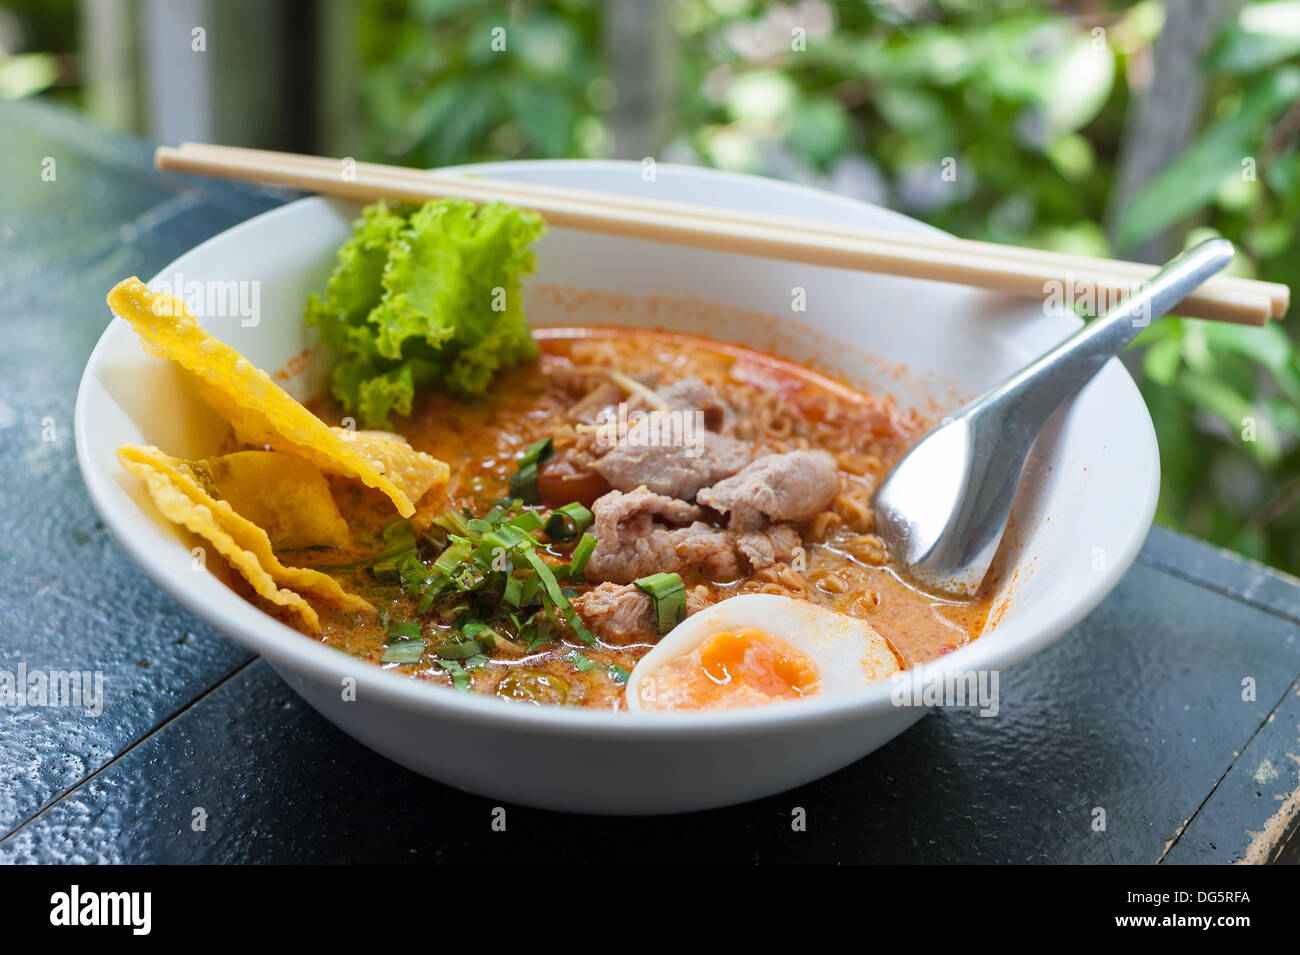 Pork noodle tom yum, condensed water egg. Stock Photo